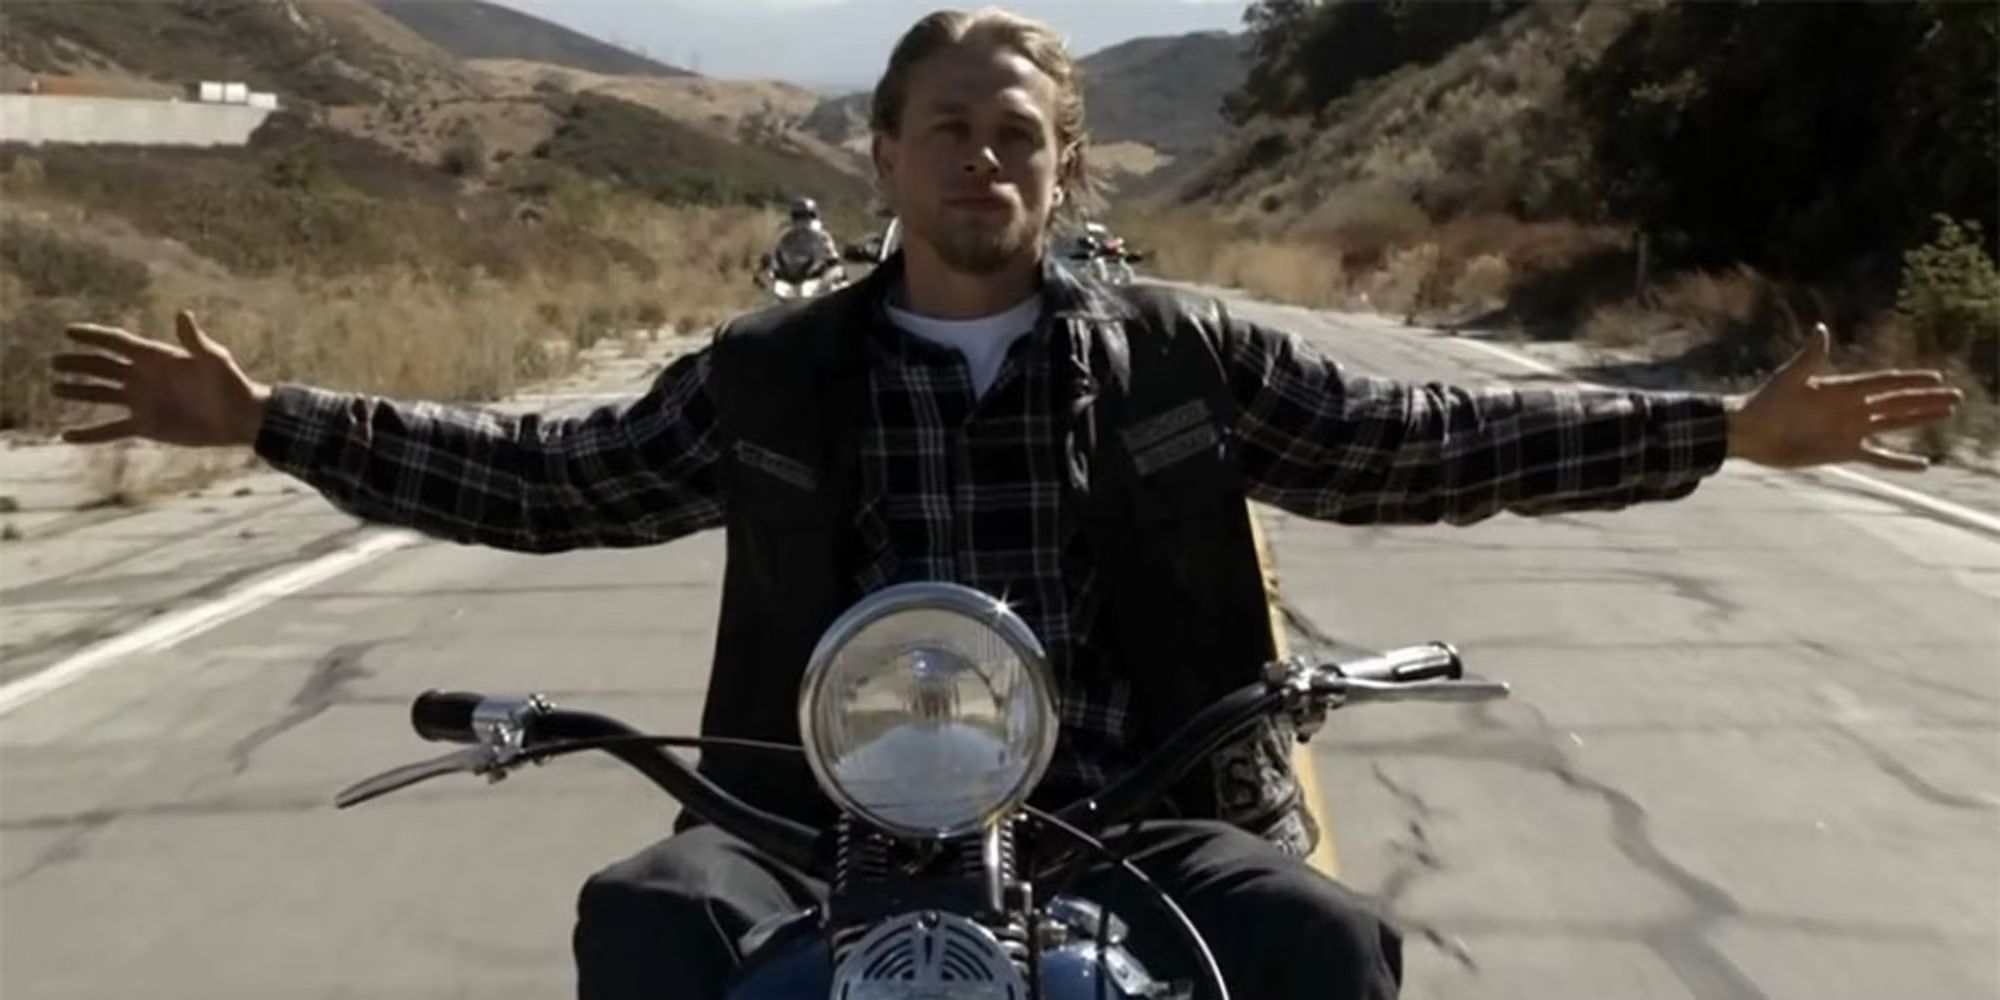 A Criminally Underrated Guy Ritchie Film Freed Charlie Hunnam From Sons of Anarchy's Shadow